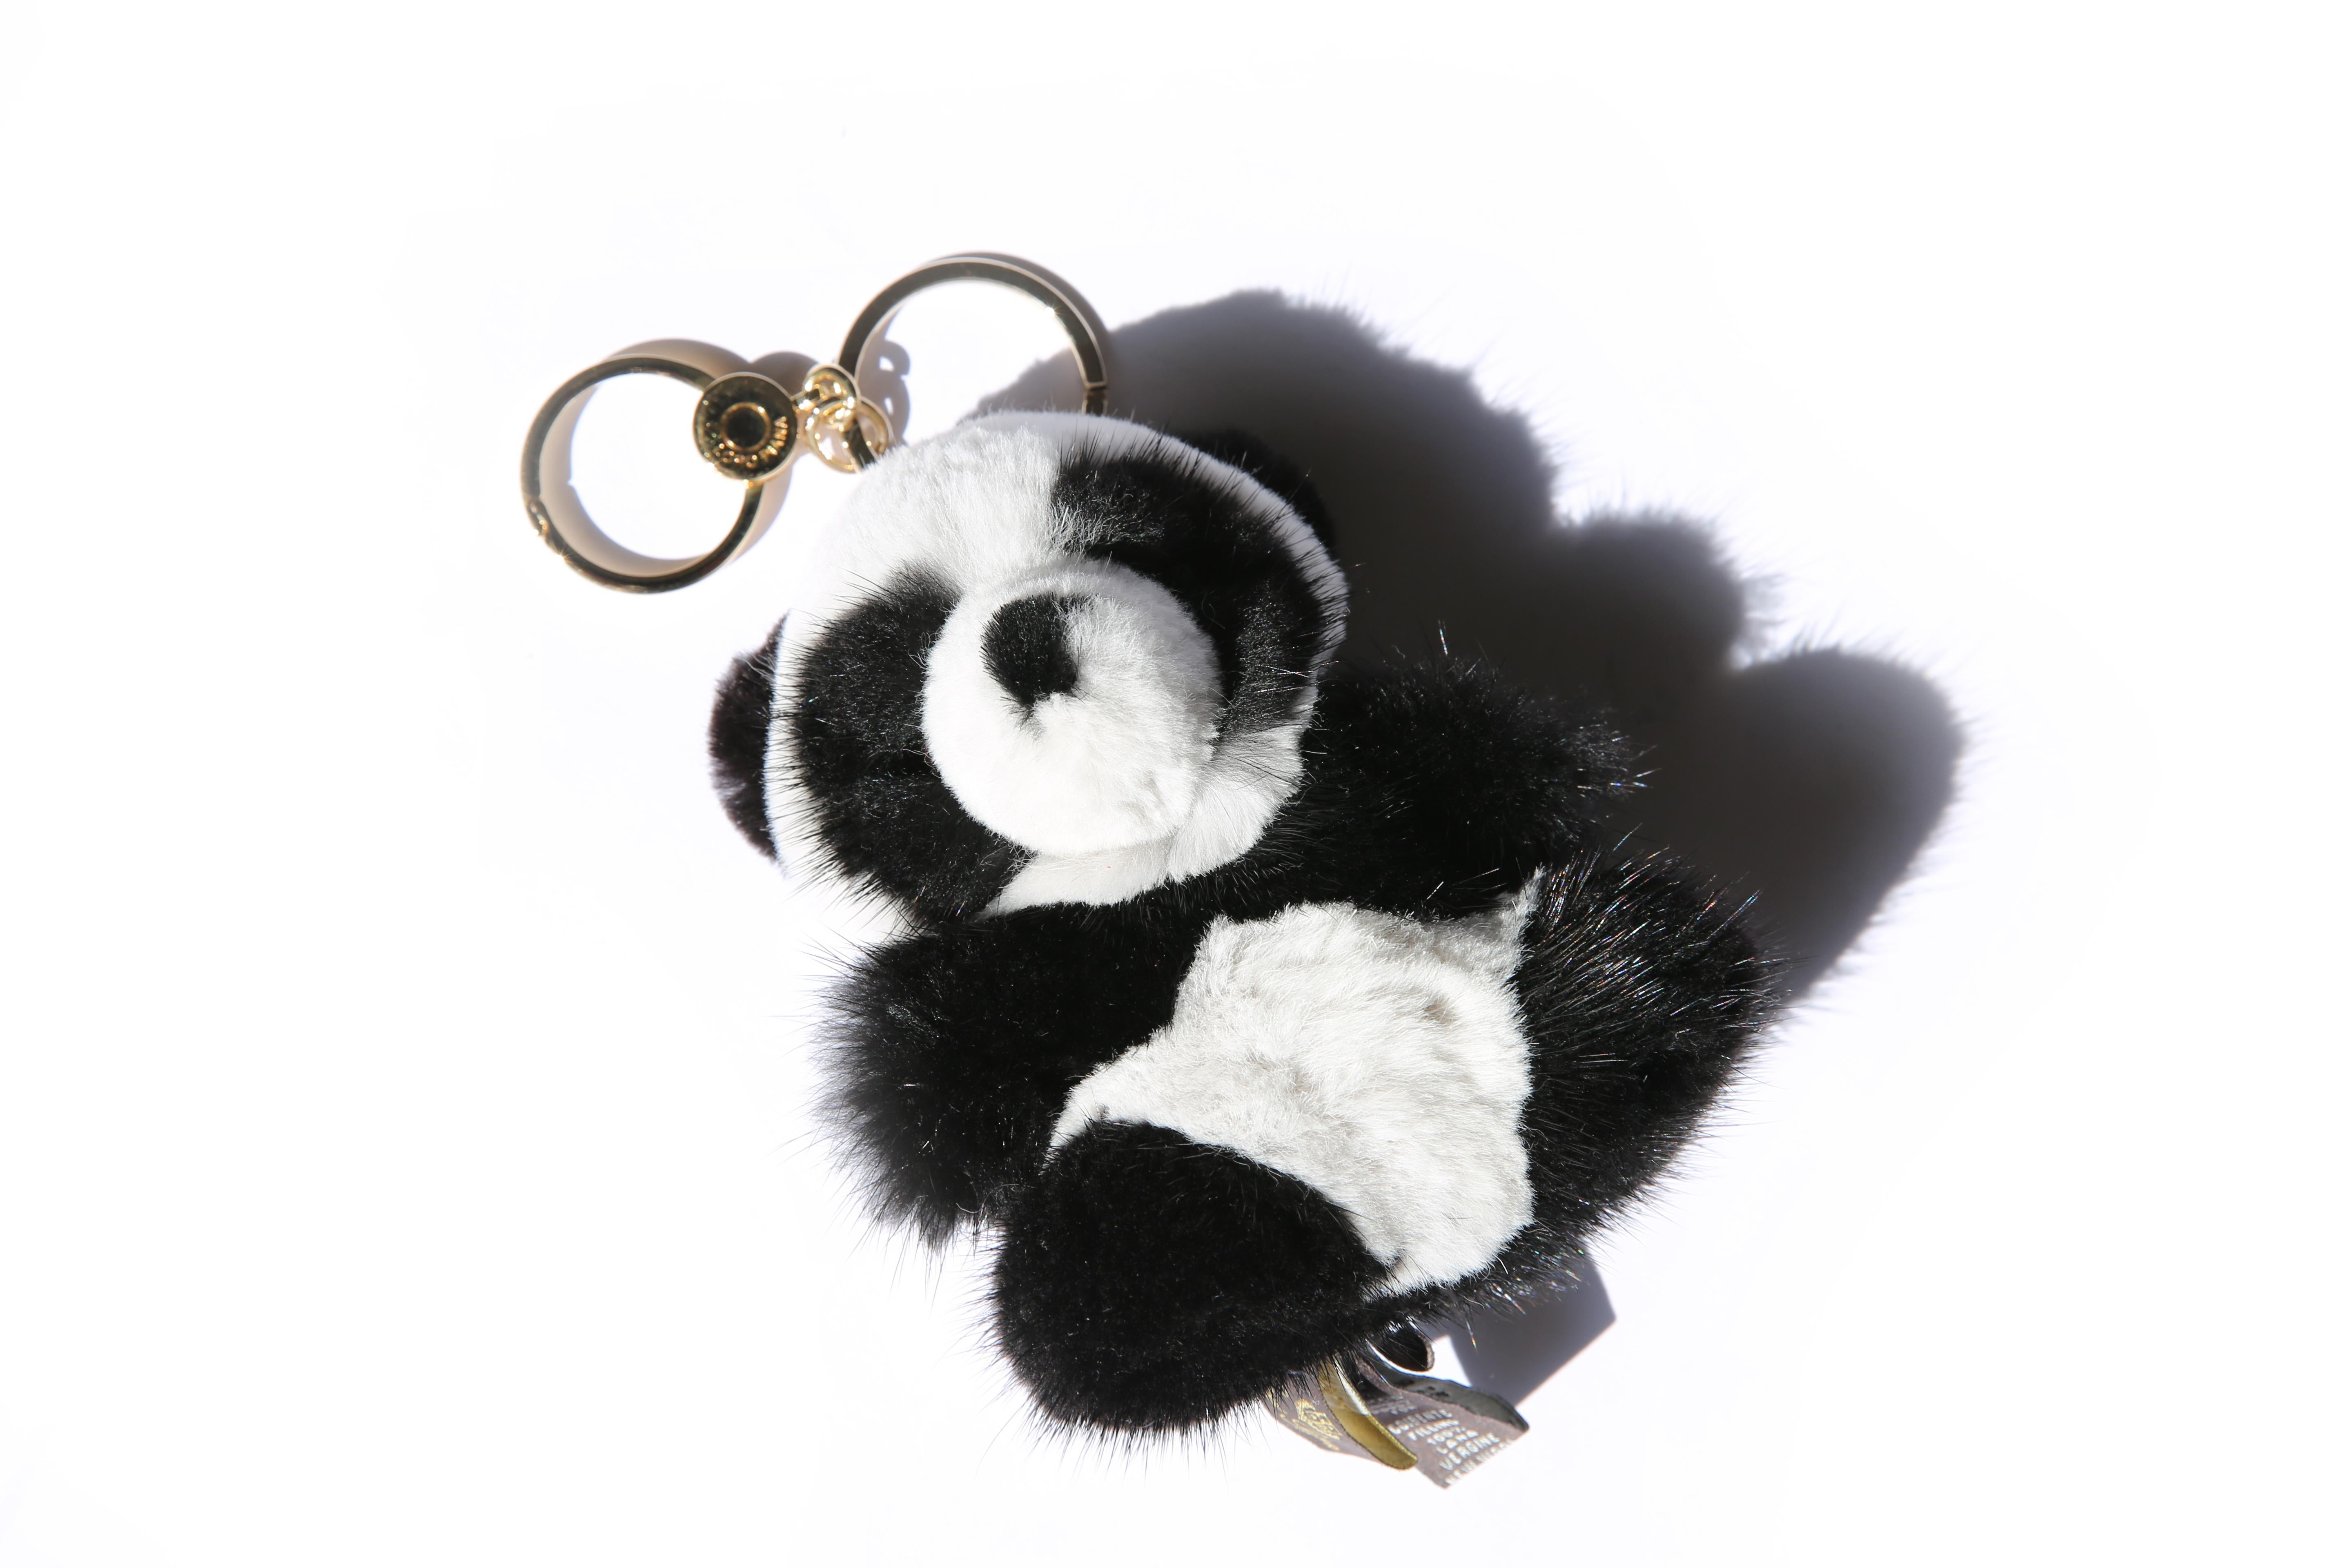 Loro Piana black and white panda keychain or bag fob in rabbit fur
Gold hardware
Engraved Loro Piana

SHIPPING - Due to the low item cost of this item, if you would like more cost effective shipping please contact me BEFORE PURCHASE. Direct options